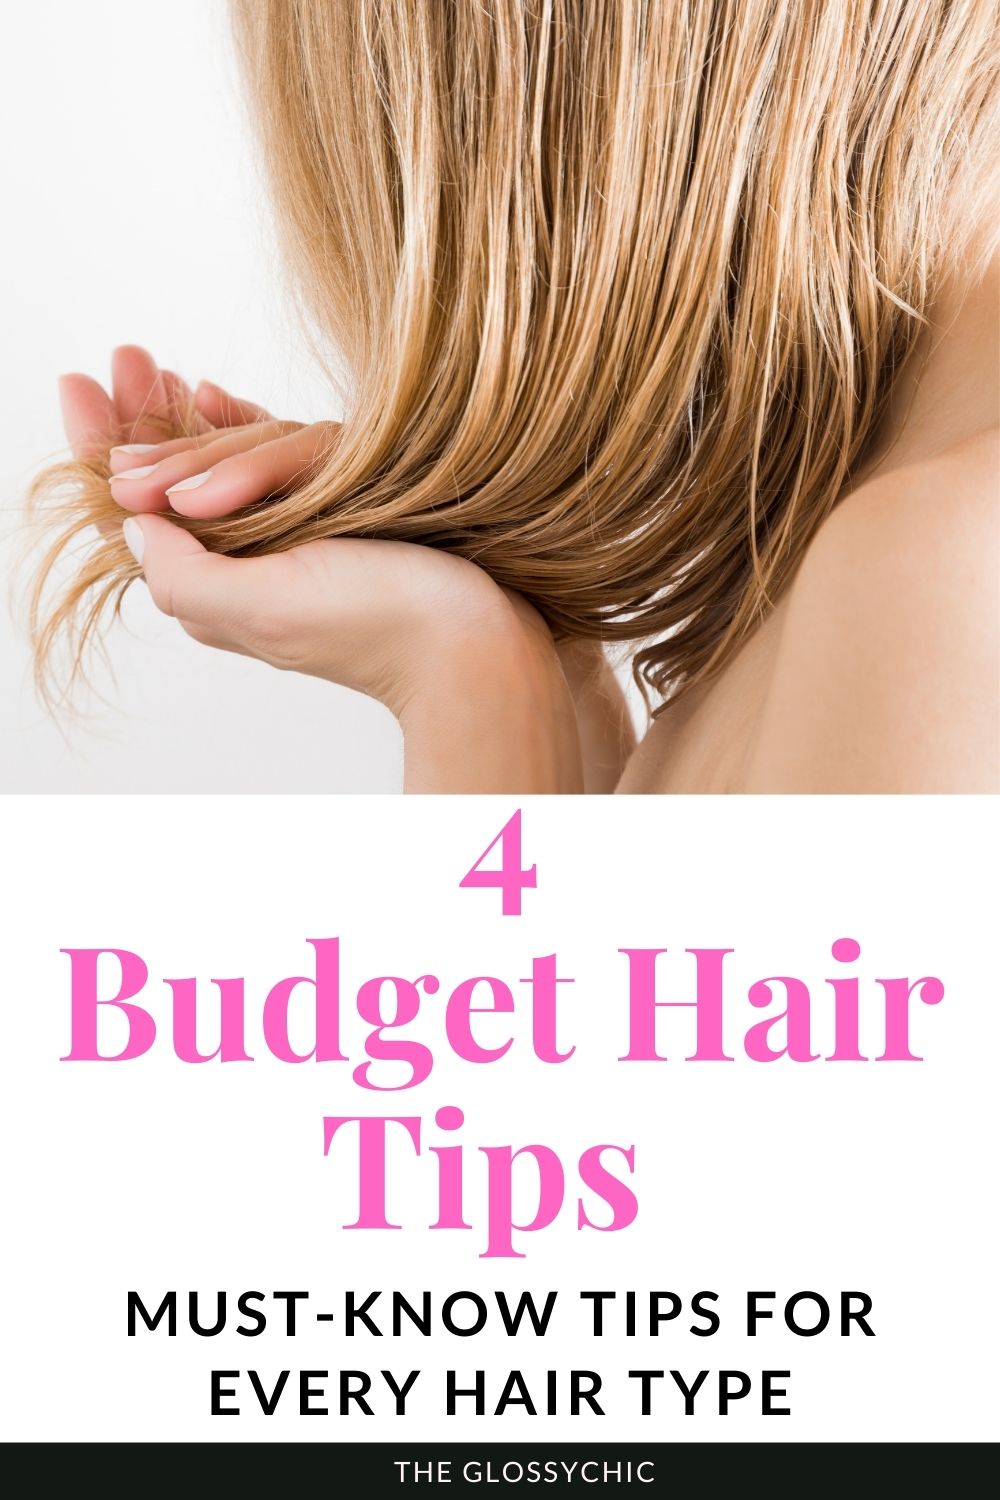 4 Budget Hair Tips - Must-Know Tips for Every Hair Type